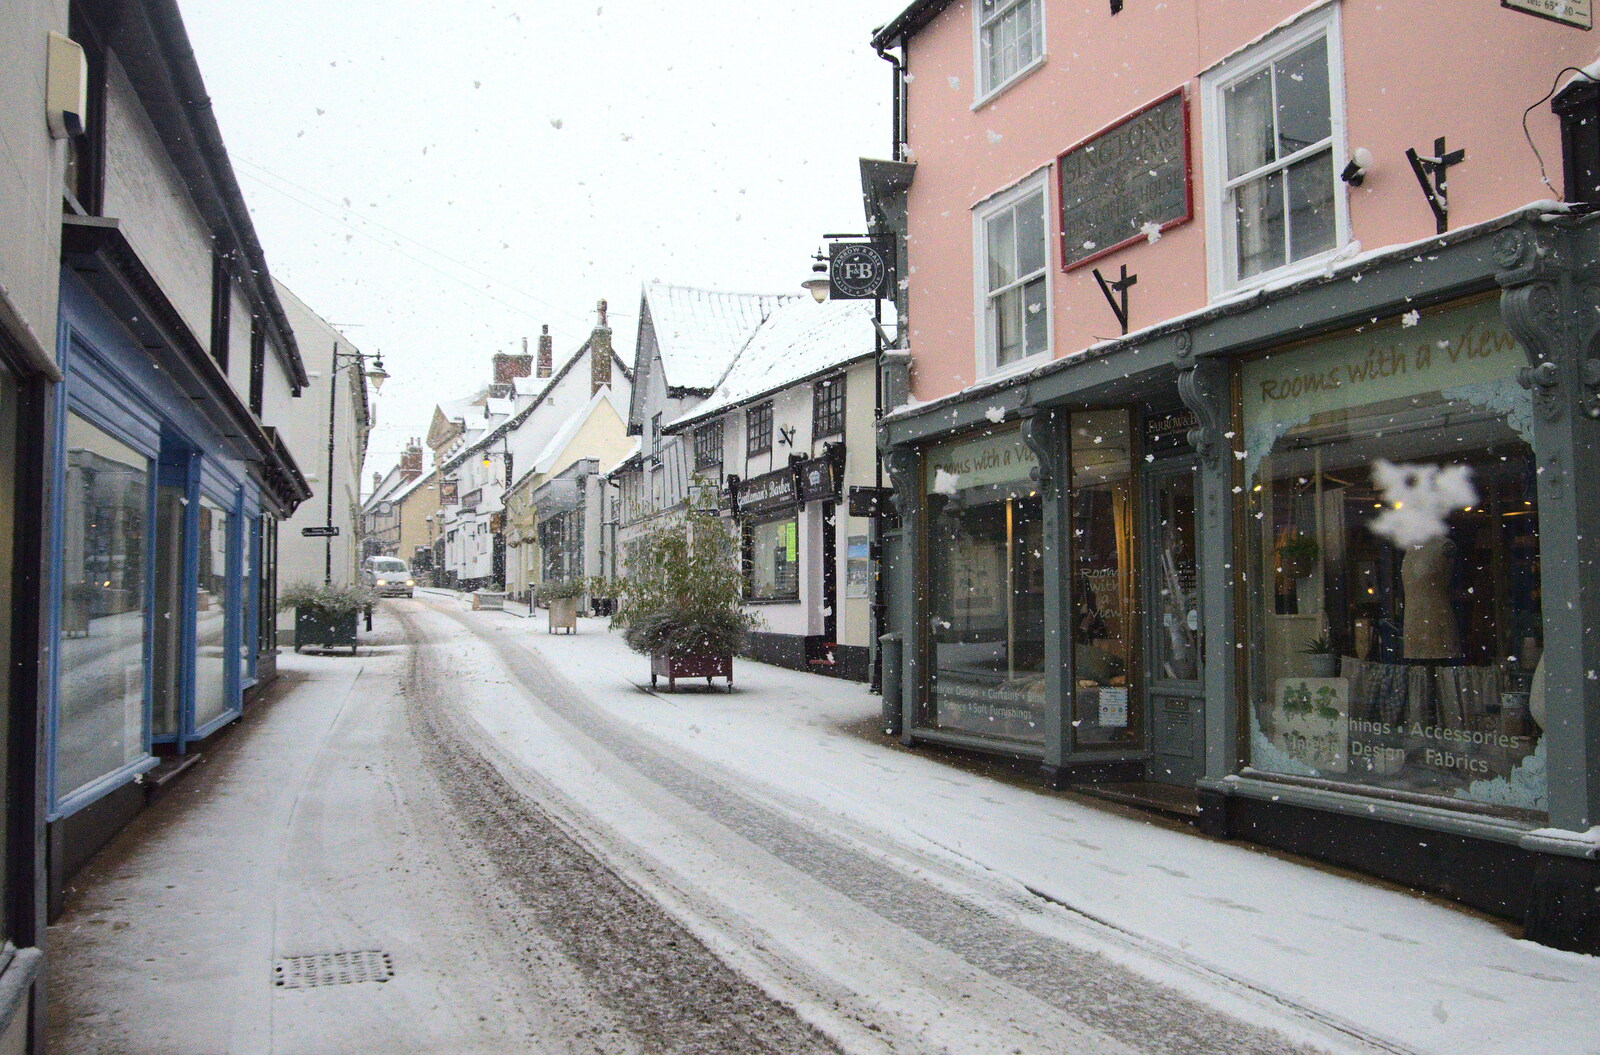 Further up St. Nicholas Street from A Snowy Morning, Diss, Norfolk - 16th January 2021